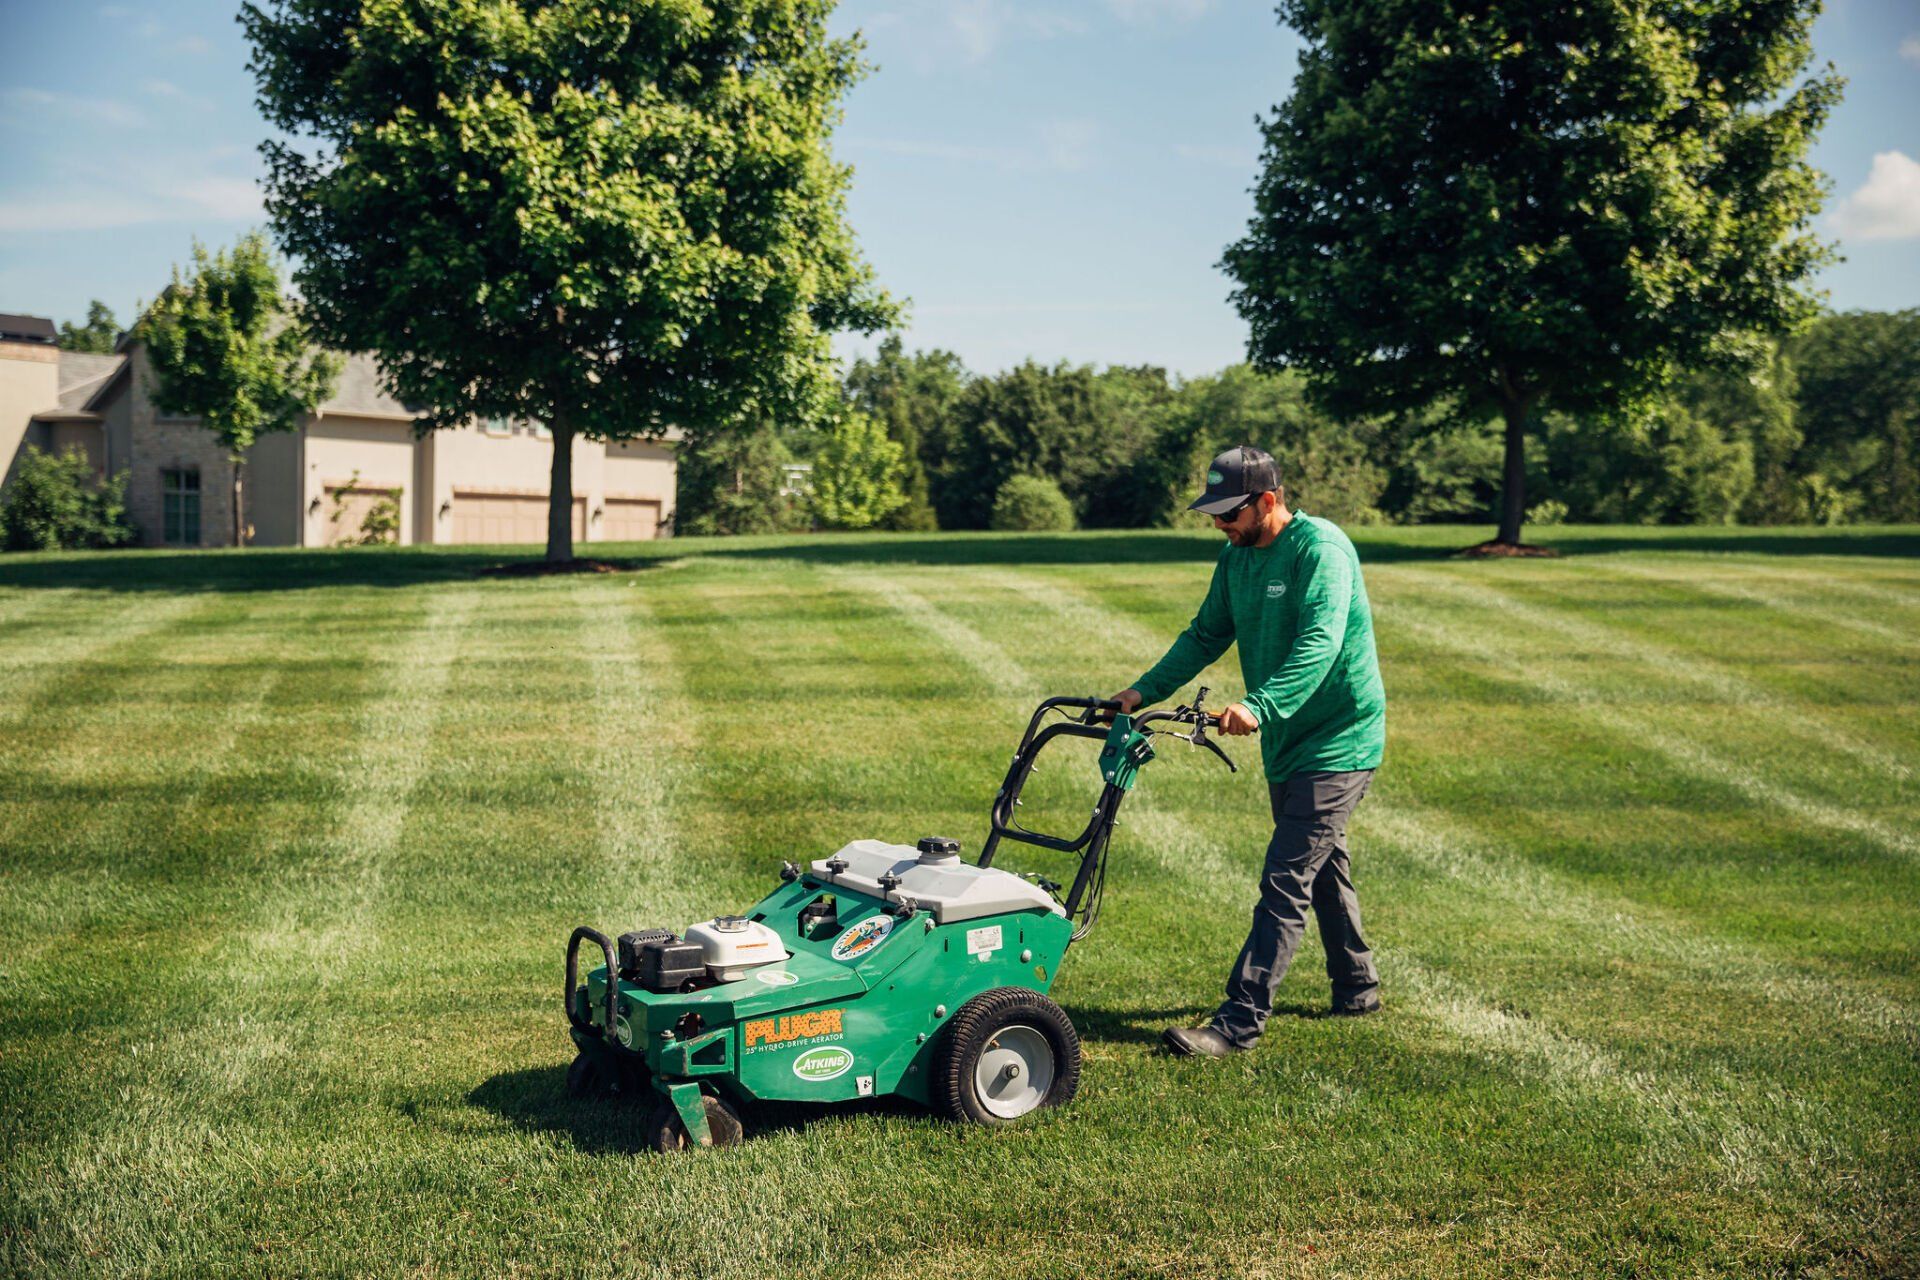 A member of the Atkins Inc. lawncare team uses a motorized aerator to care for a customer's lawn.